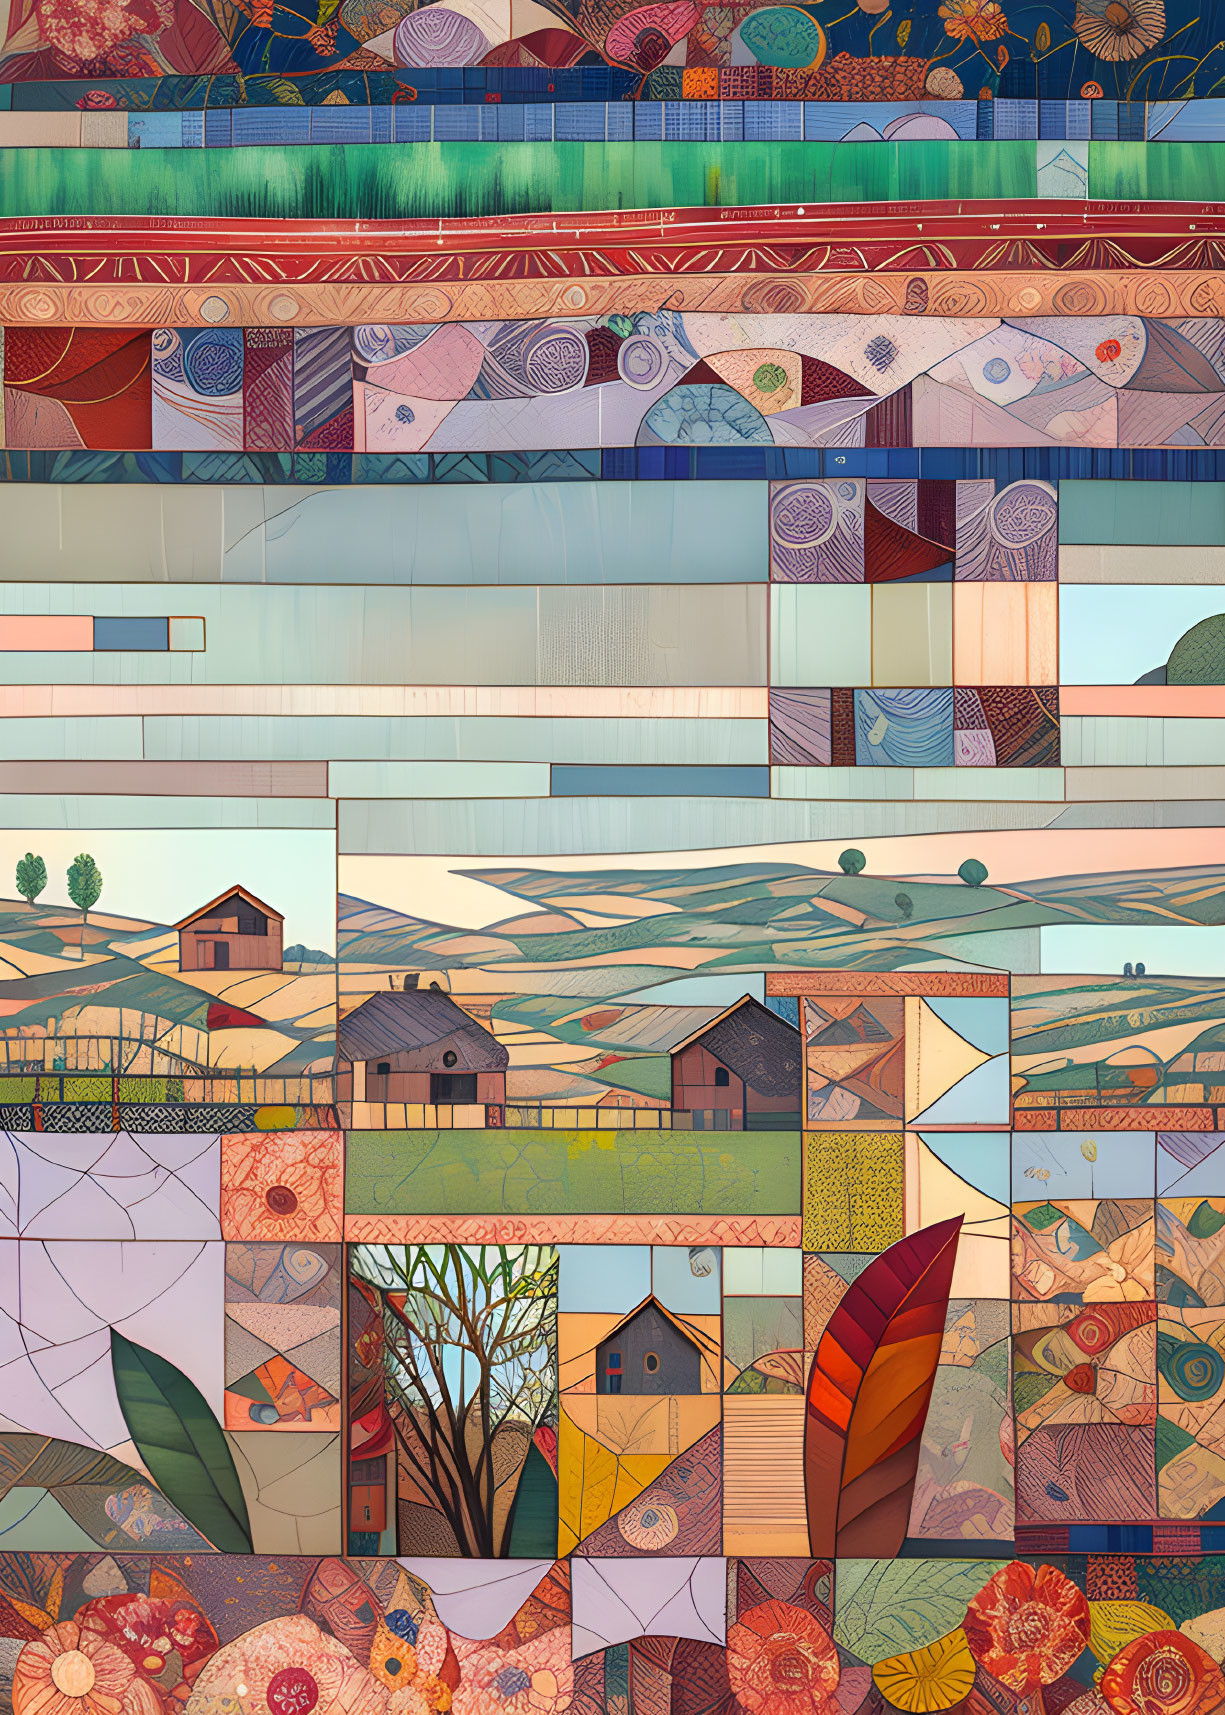 Geometric Collage-Style Illustration of Layered Landscapes